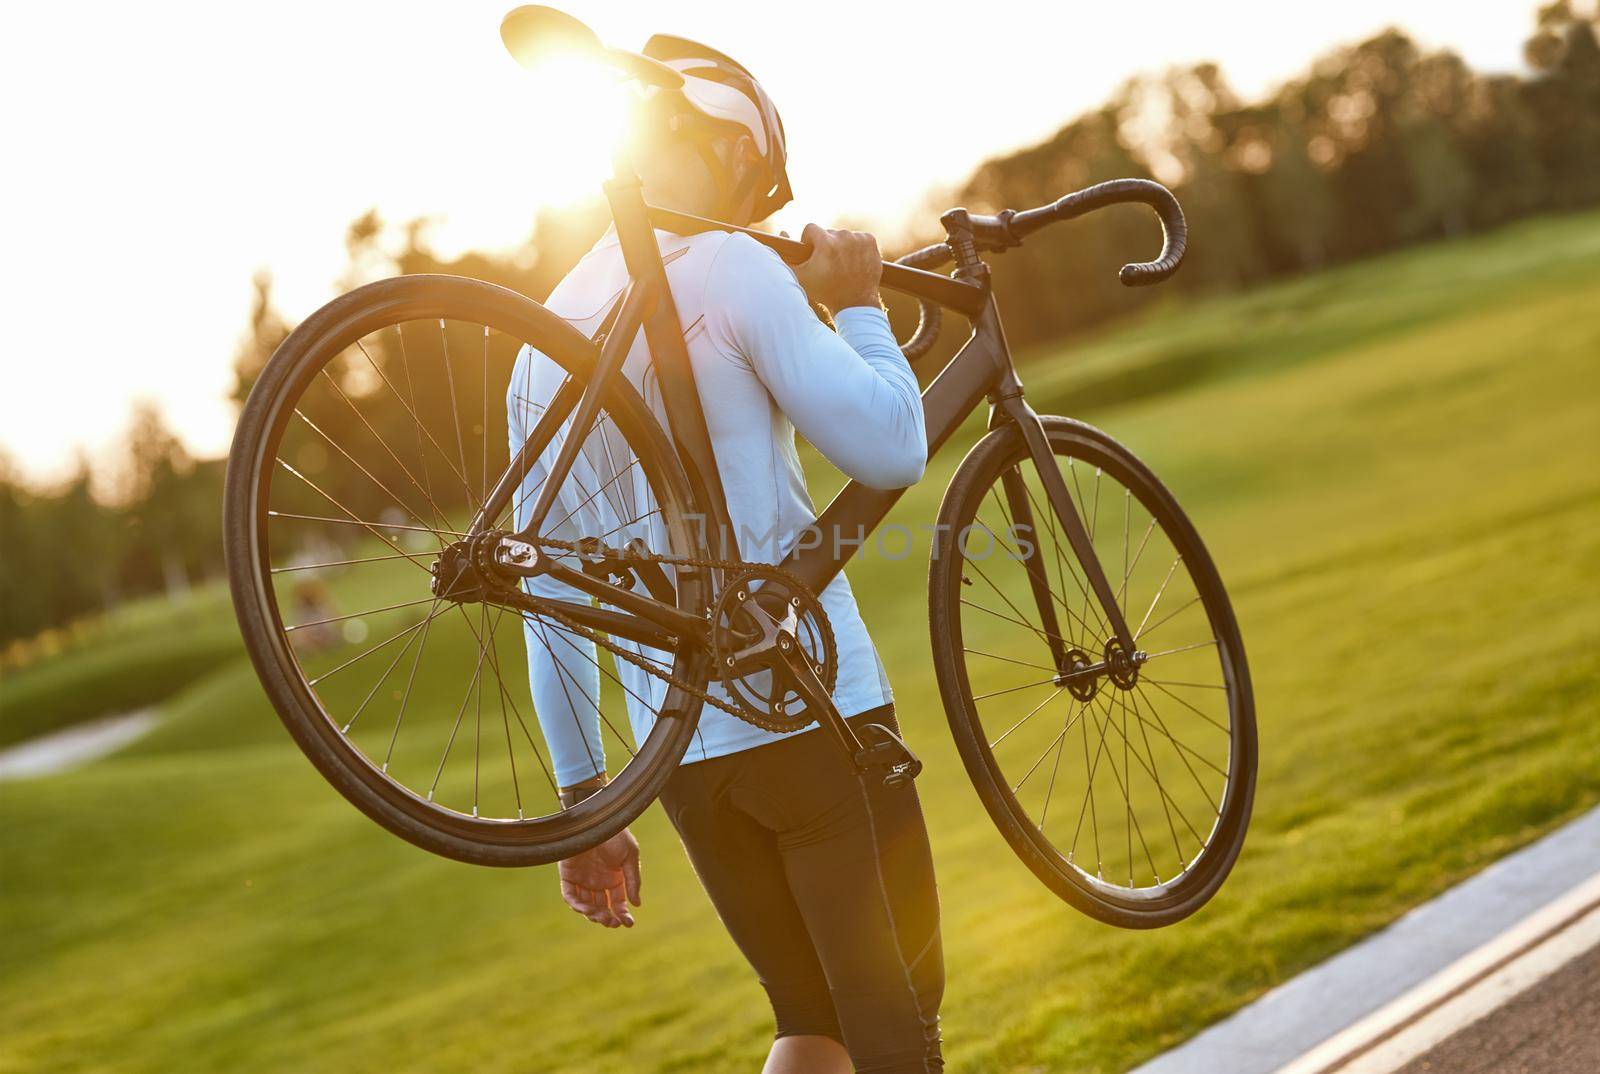 Strong athletic man in sportswear and protective helmet carrying his bicycle after cycling training in park, enjoying amazing sunset. Active lifestyle and sport concept. Biking outdoors